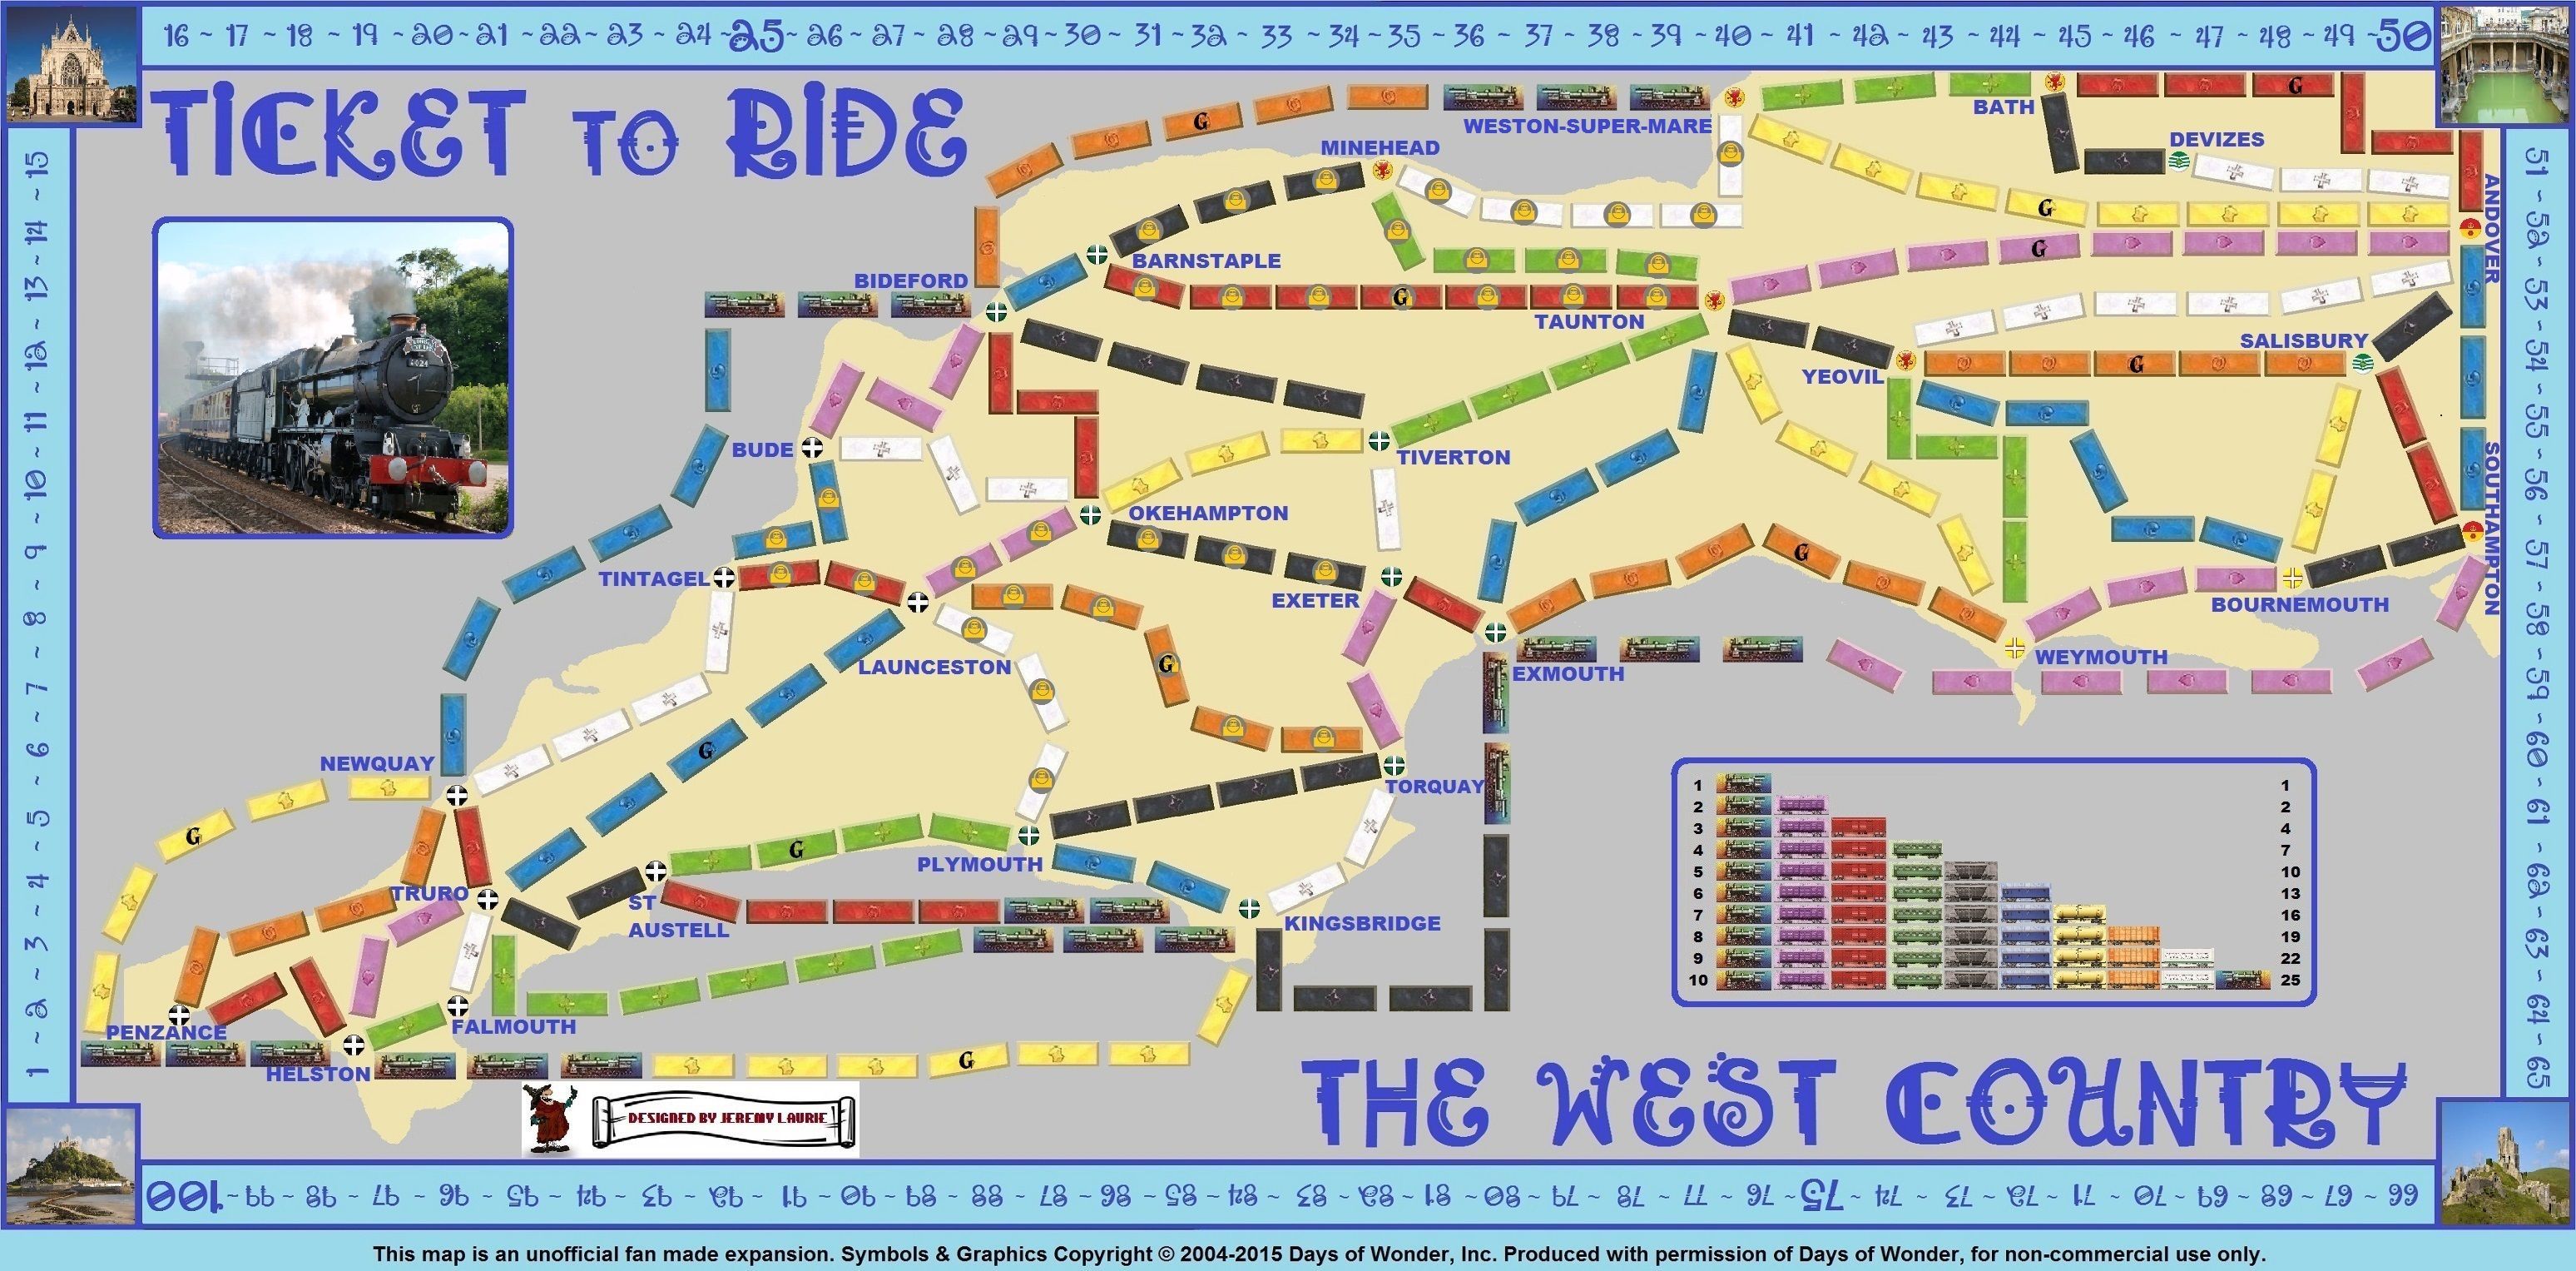 West Country (UK) (fan expansion of Ticket to Ride)